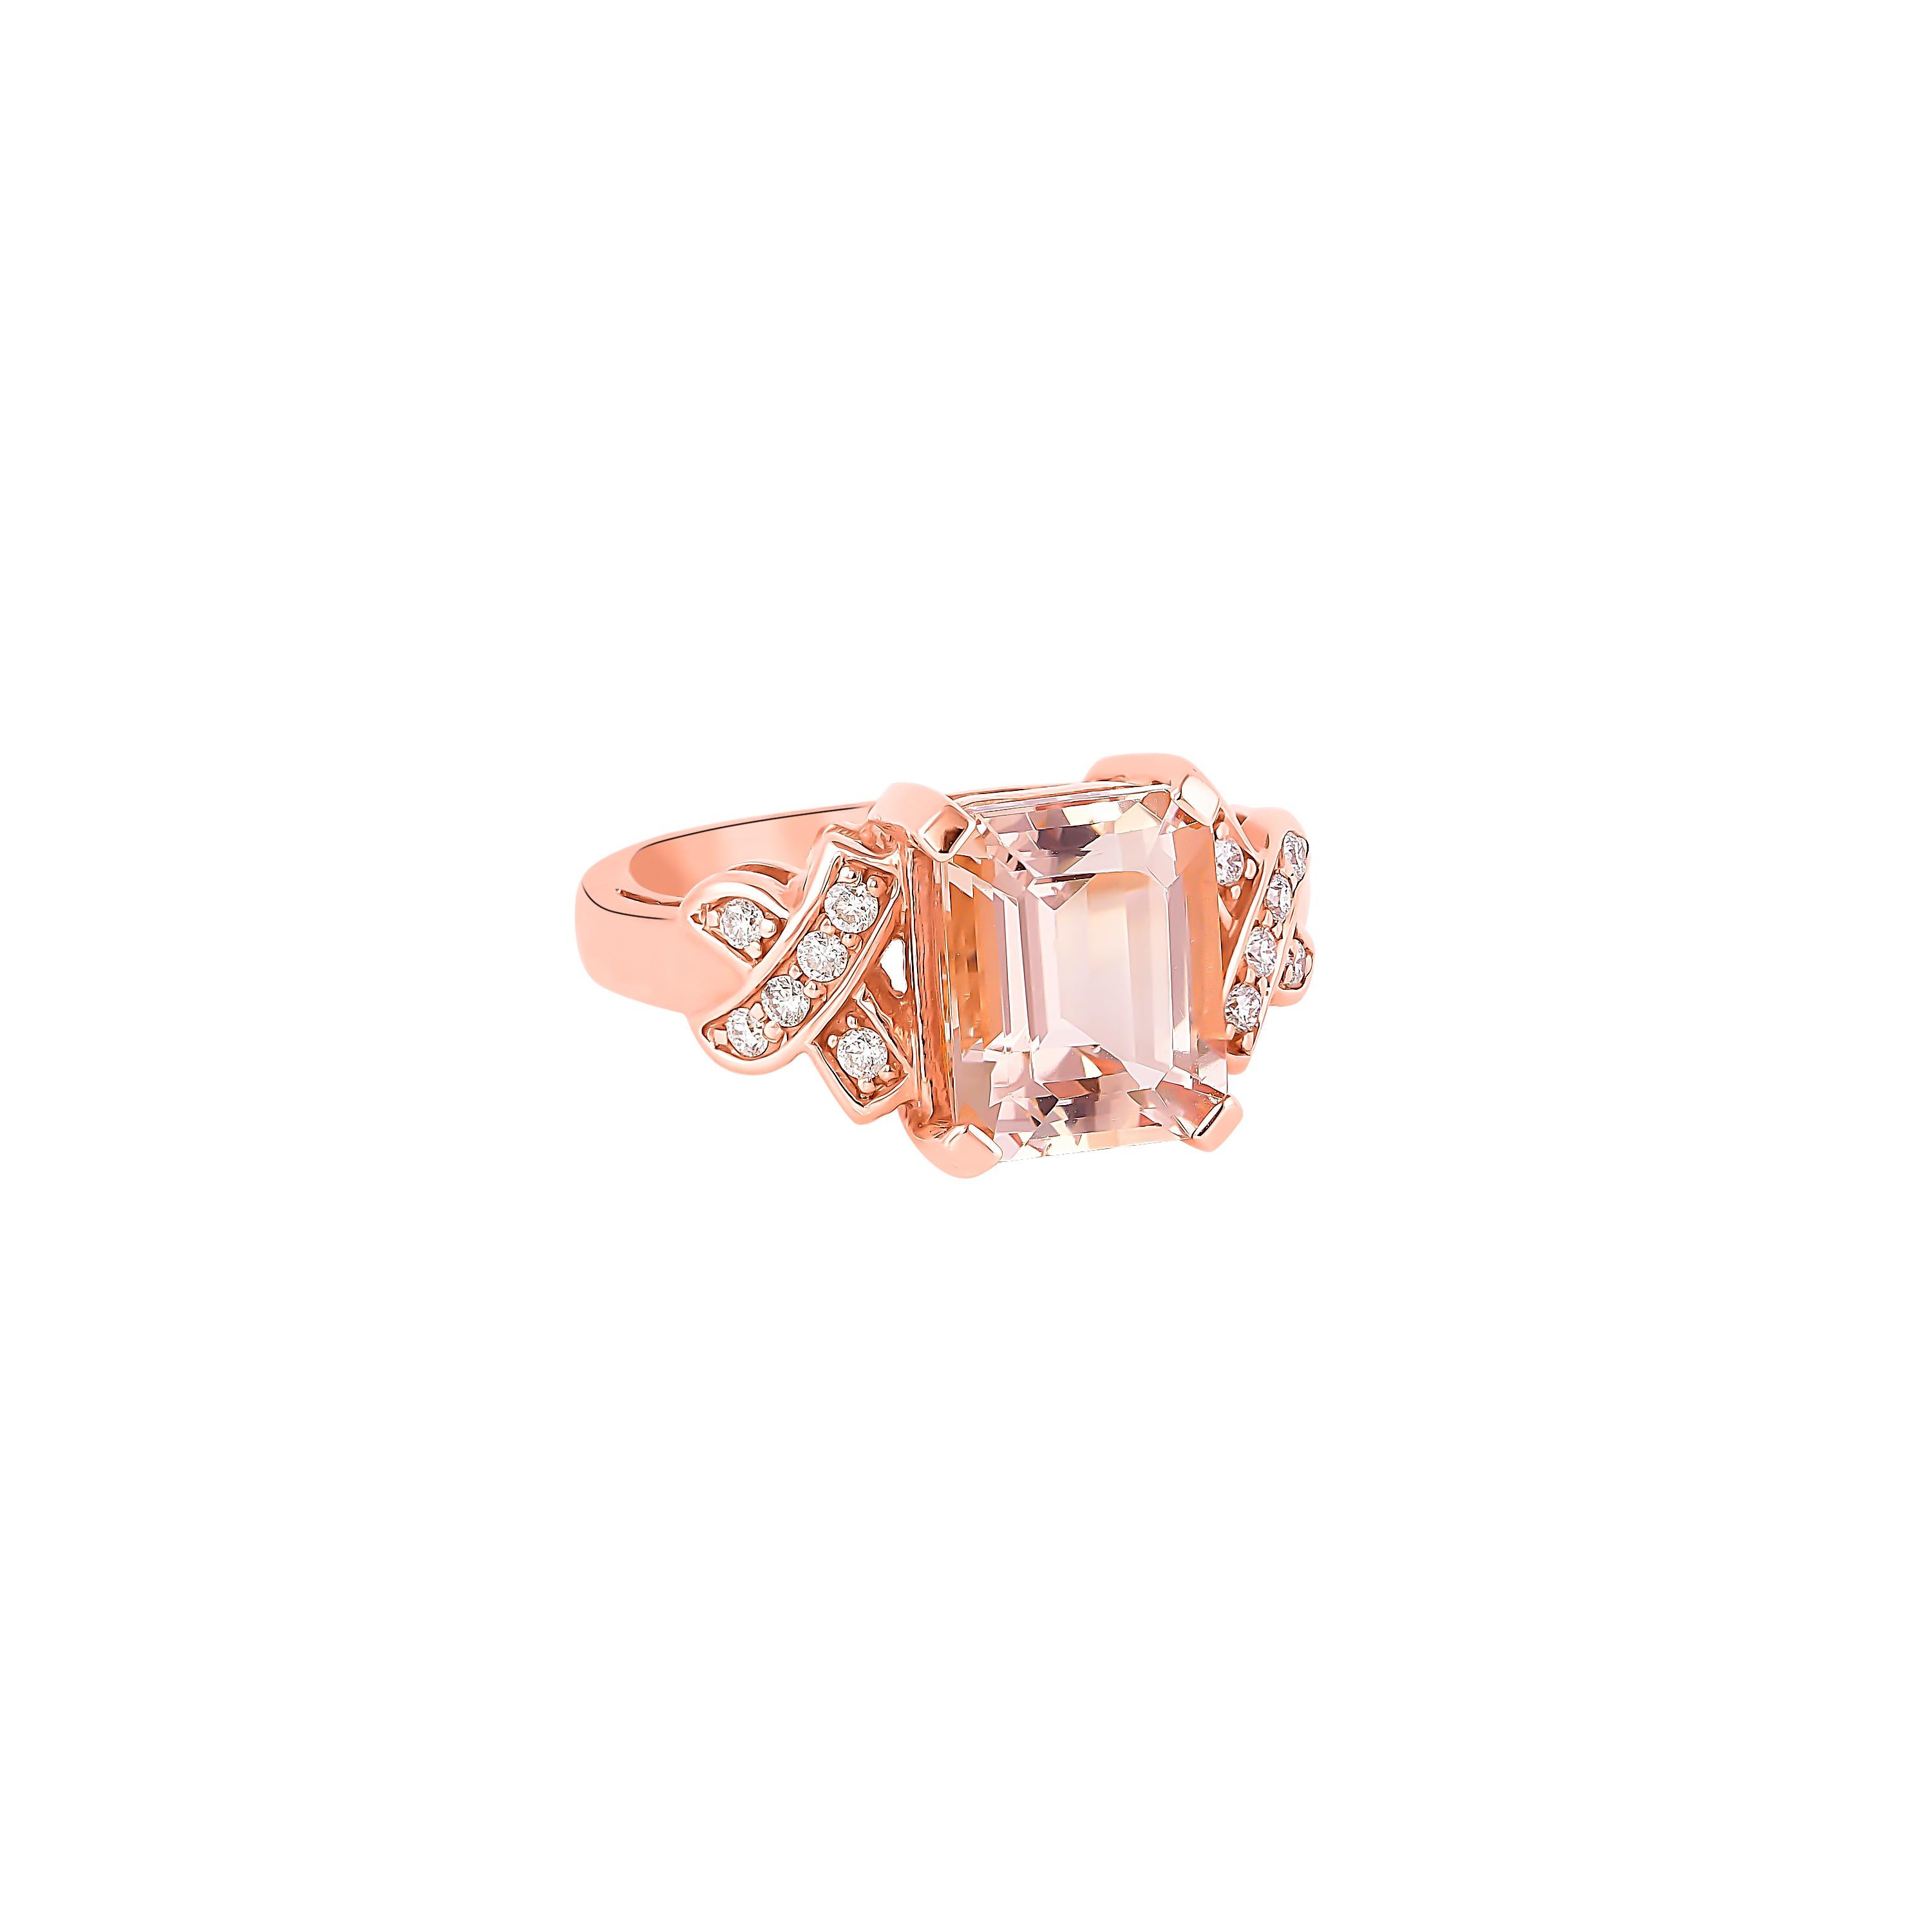 This collection features an array of magnificent morganites! Accented with Diamond these rings are made in rose gold and present a classic yet elegant look. 

Classic morganite ring in 18K Rose gold with Diamond. 

Morganite: 3.58 carat, 10X8mm